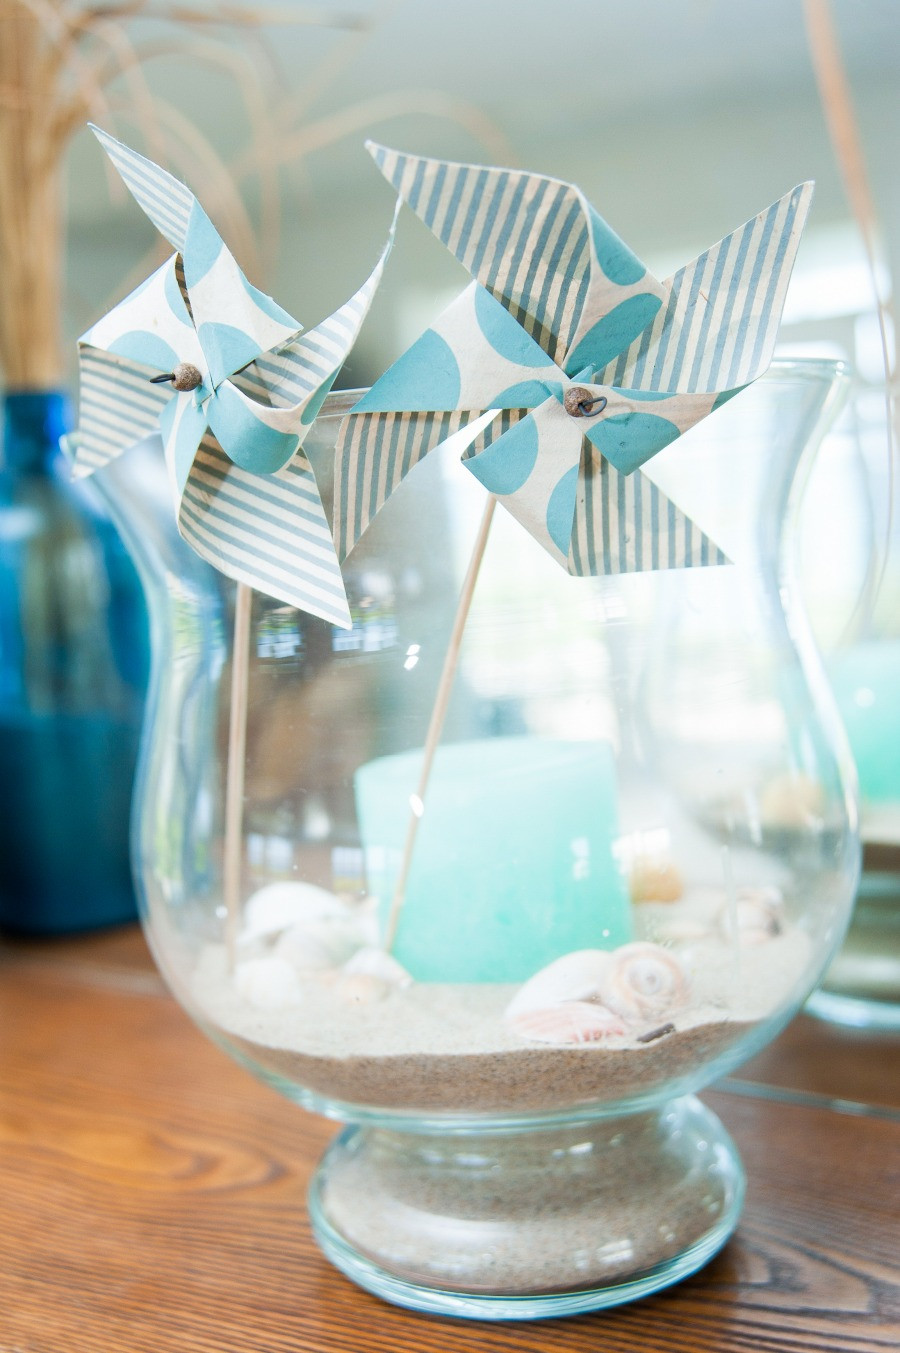 DIY Beach Wedding Ideas
 DIY Beach Wedding Ideas The SnapKnot Blog